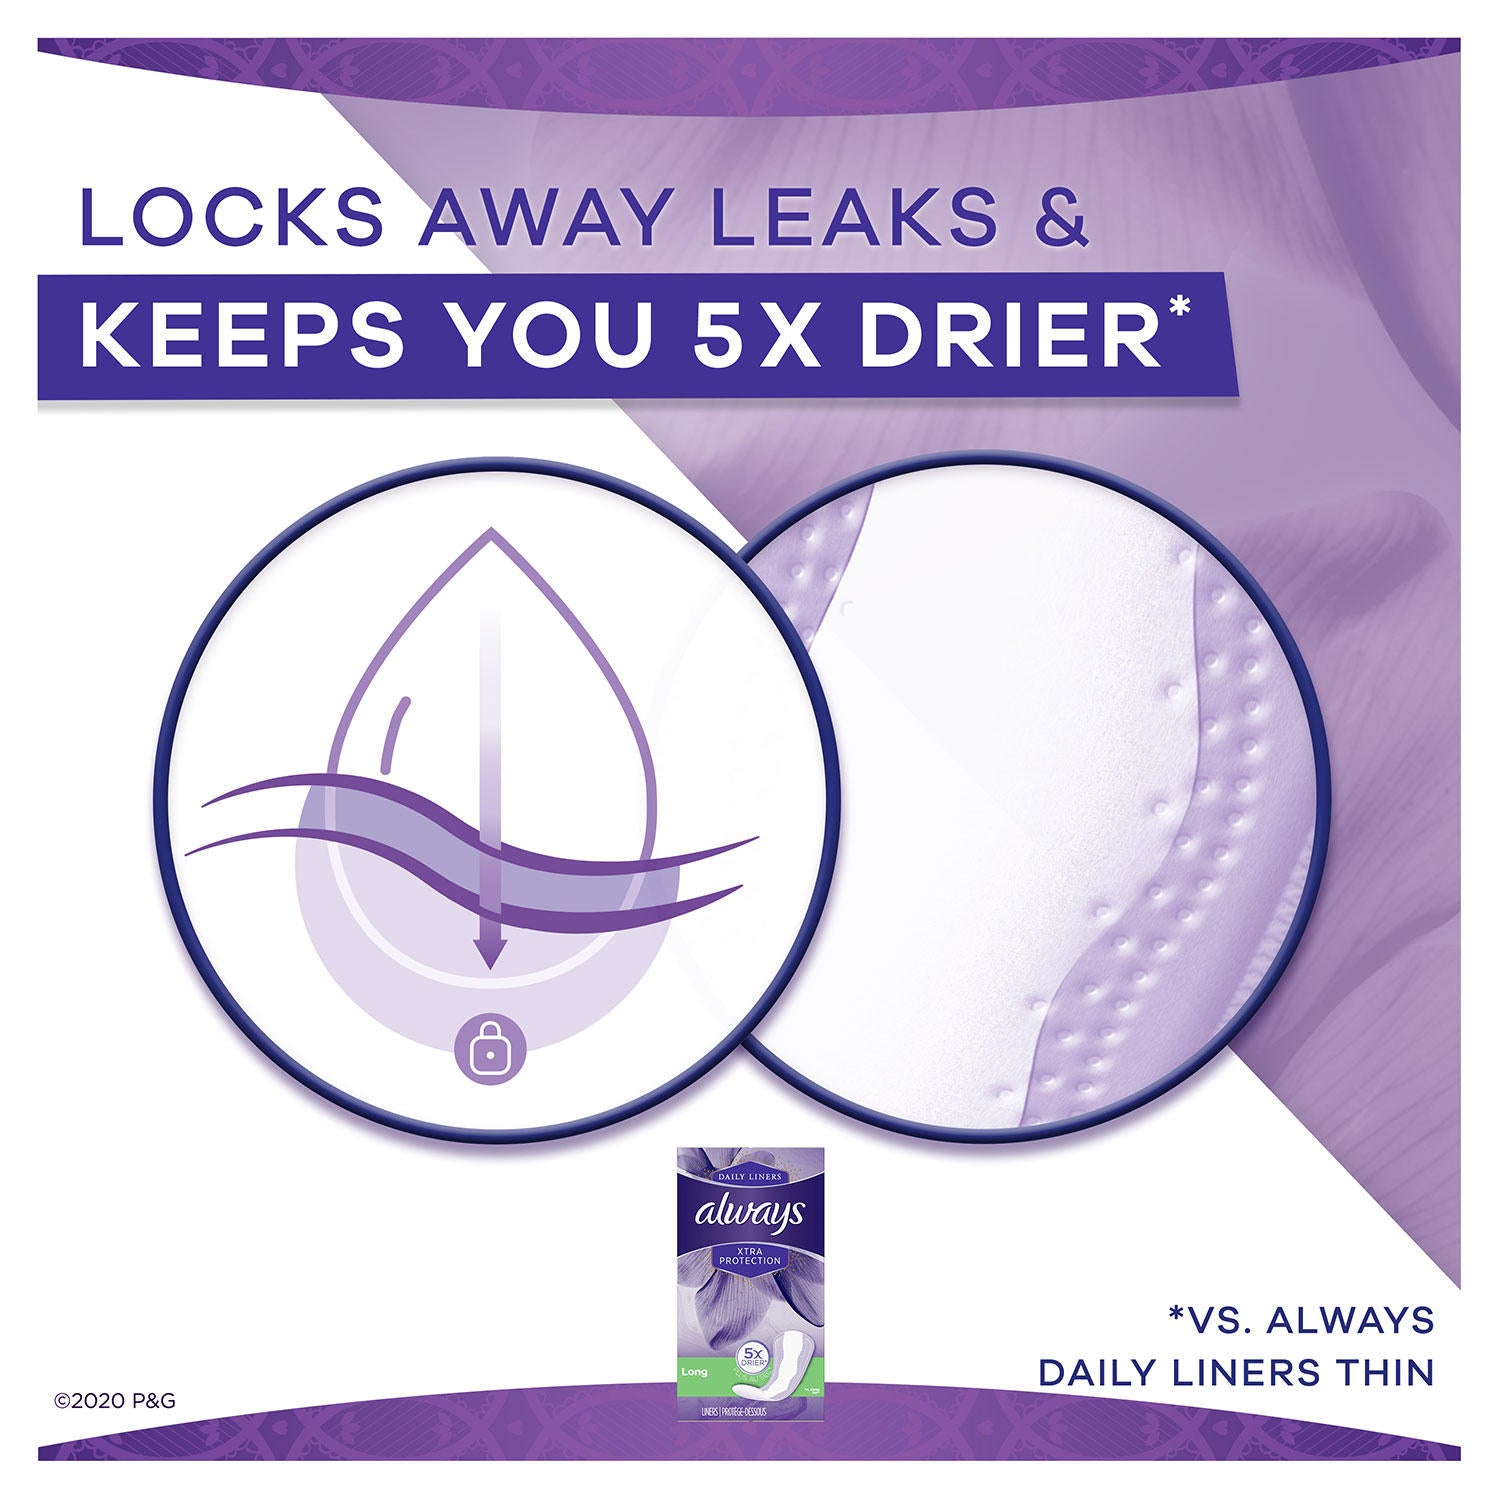 Always Anti-Bunch Xtra Protection, Panty Liners For Women, Light